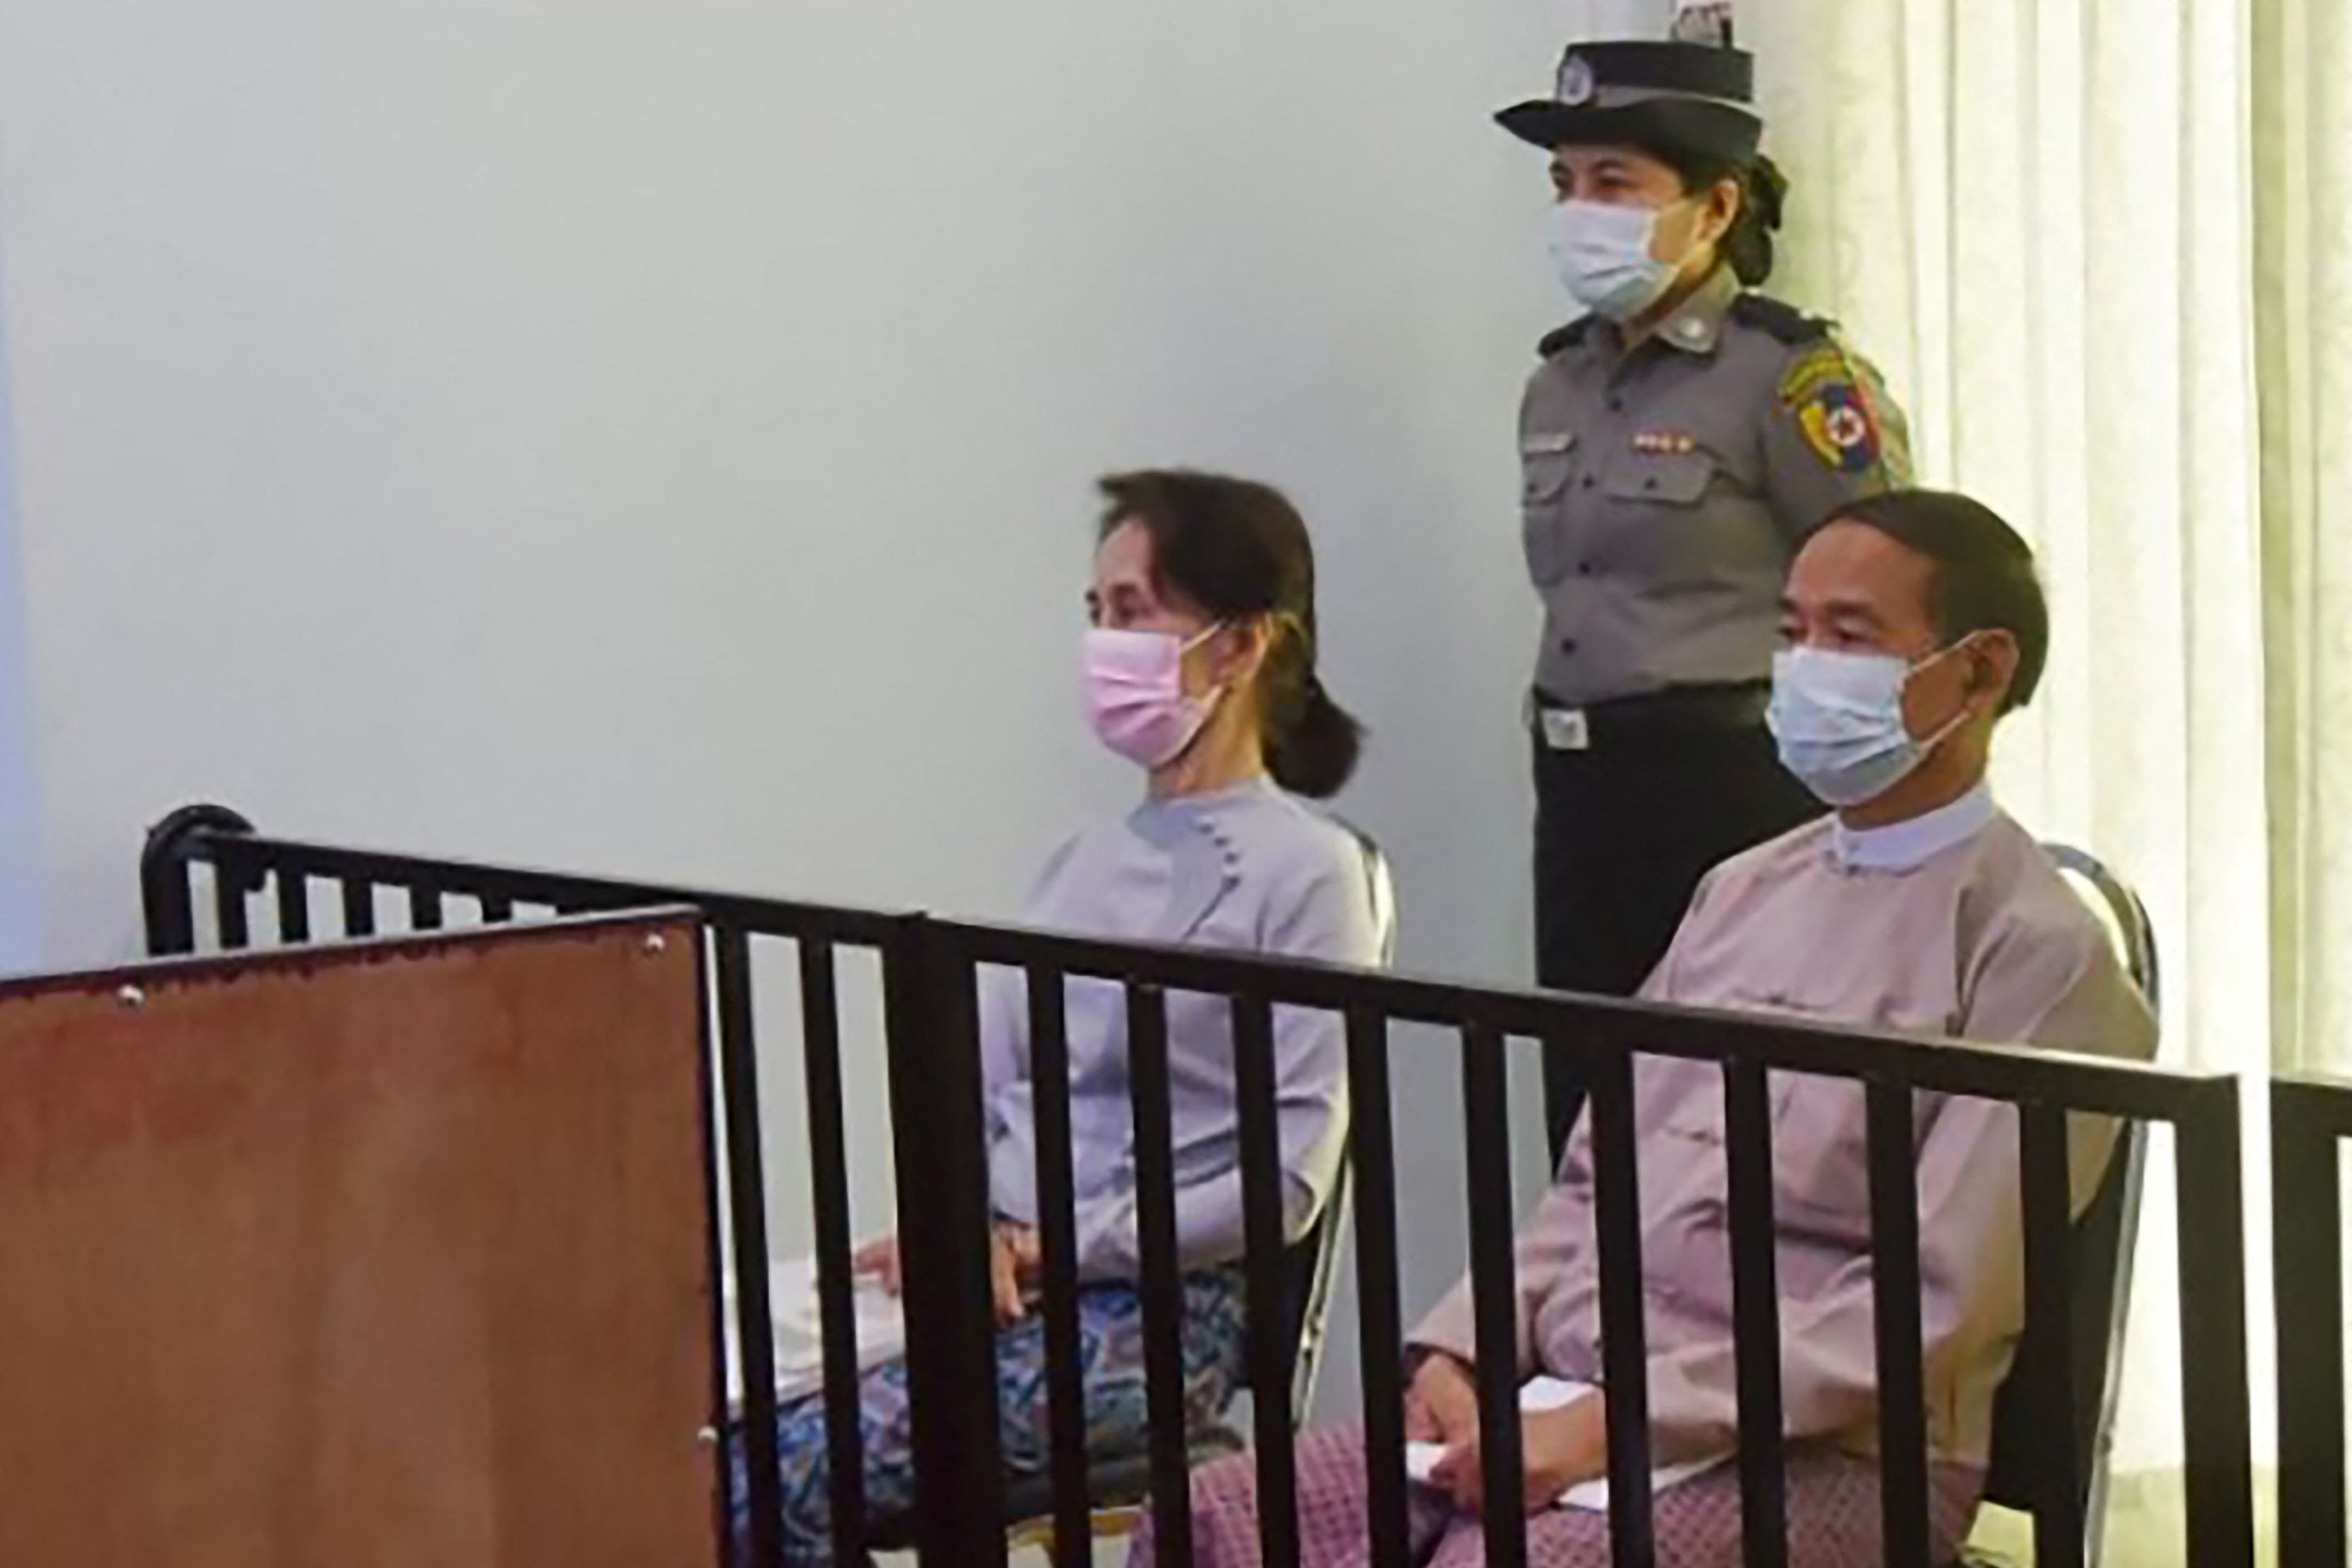 This file handout photo shows detained civilian leader Aung San Suu Kyi (L) and detained President Win Myint (R) during their first court appearance, since the military detained them in a coup on Feb. 1, in Naypyidaw, Myanmar, May 24, 2021. (Myanmar's ministry of information via AFP)